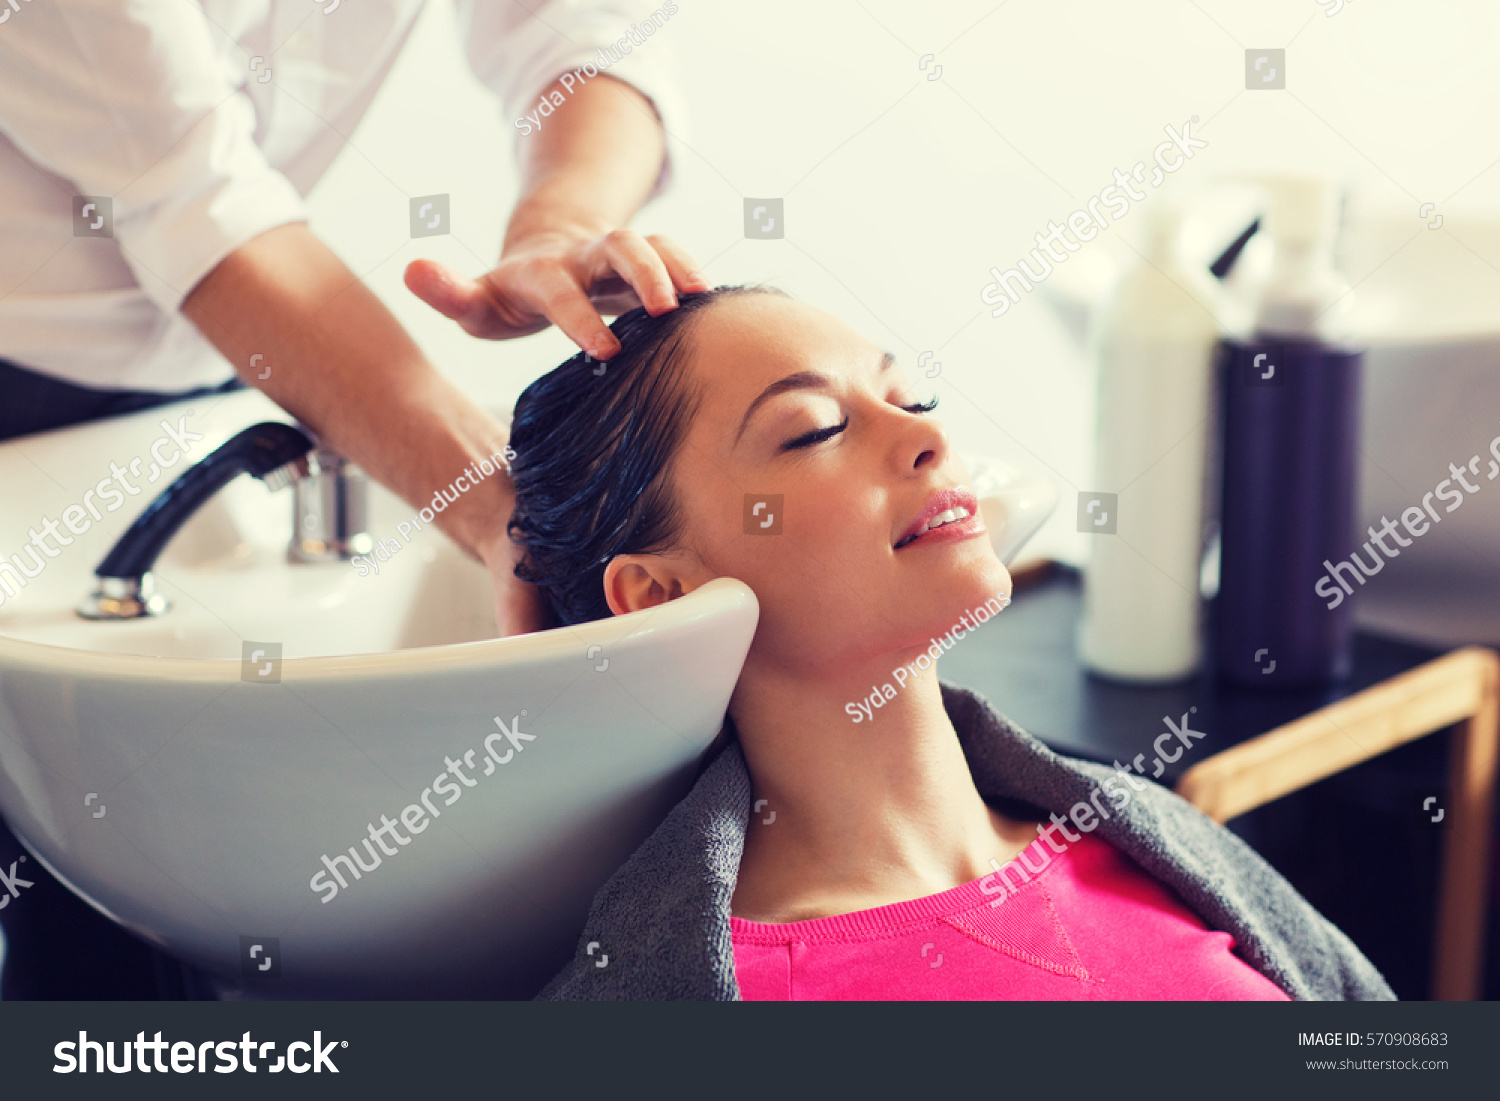 beauty and people concept - happy young woman with hairdresser washing head at hair salon #570908683